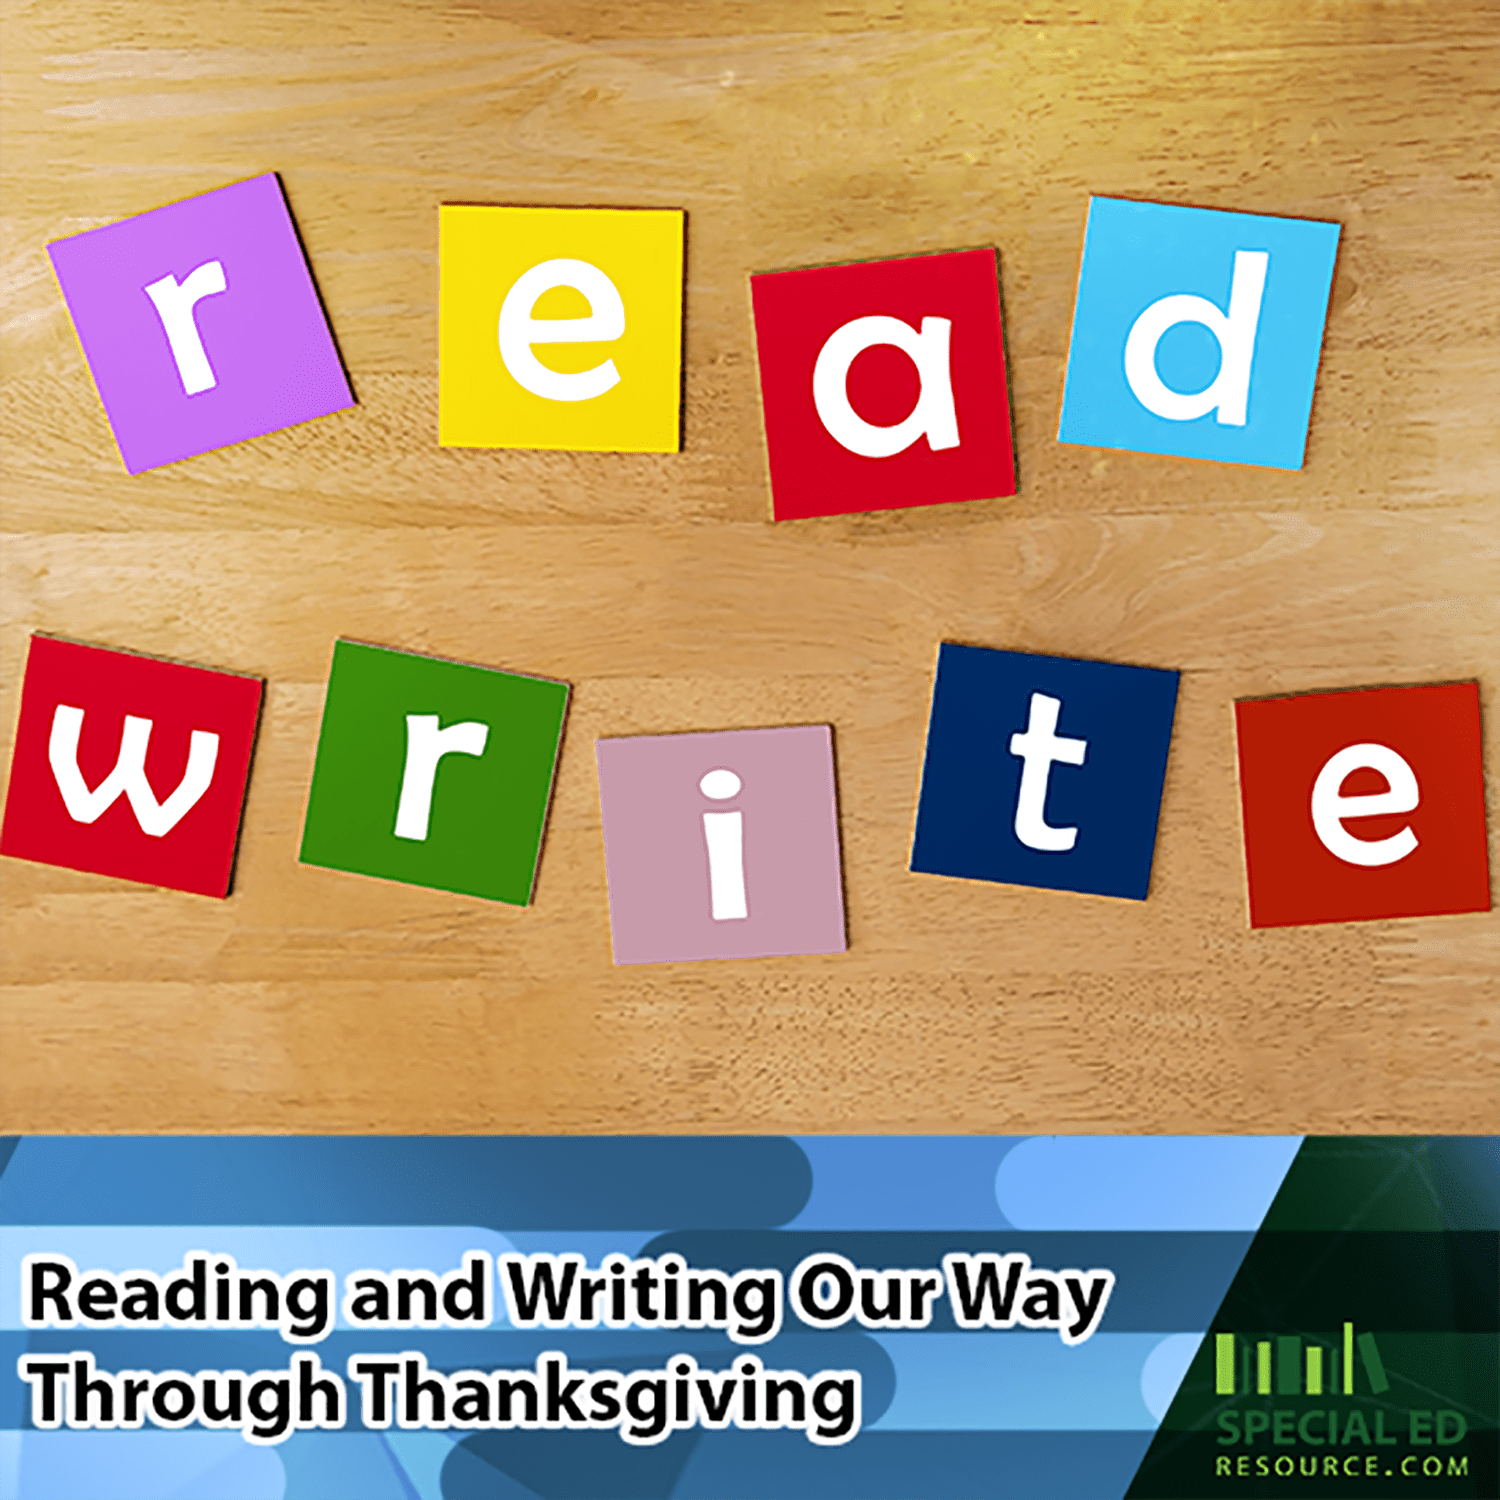 Reading and Writing Our Way Through Thanksgiving